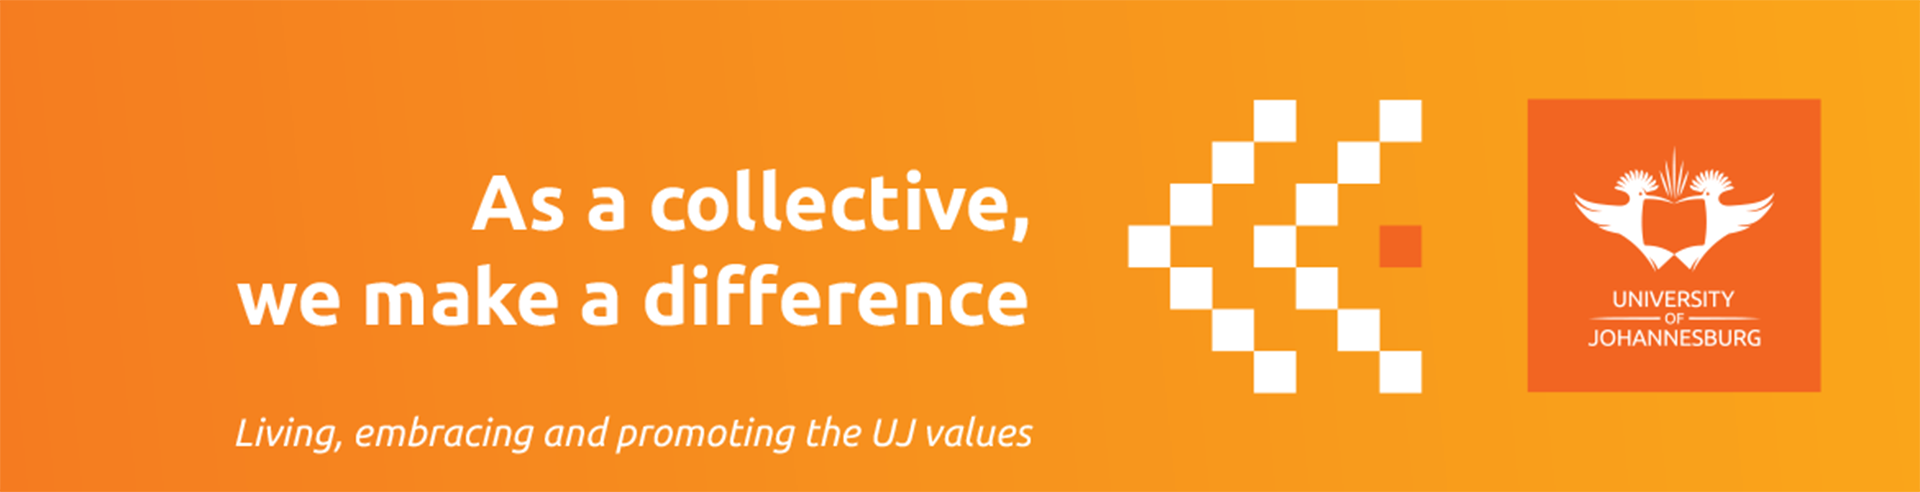 Uj Values Expressions Posters 2020 Ulink 1170x300mm 14